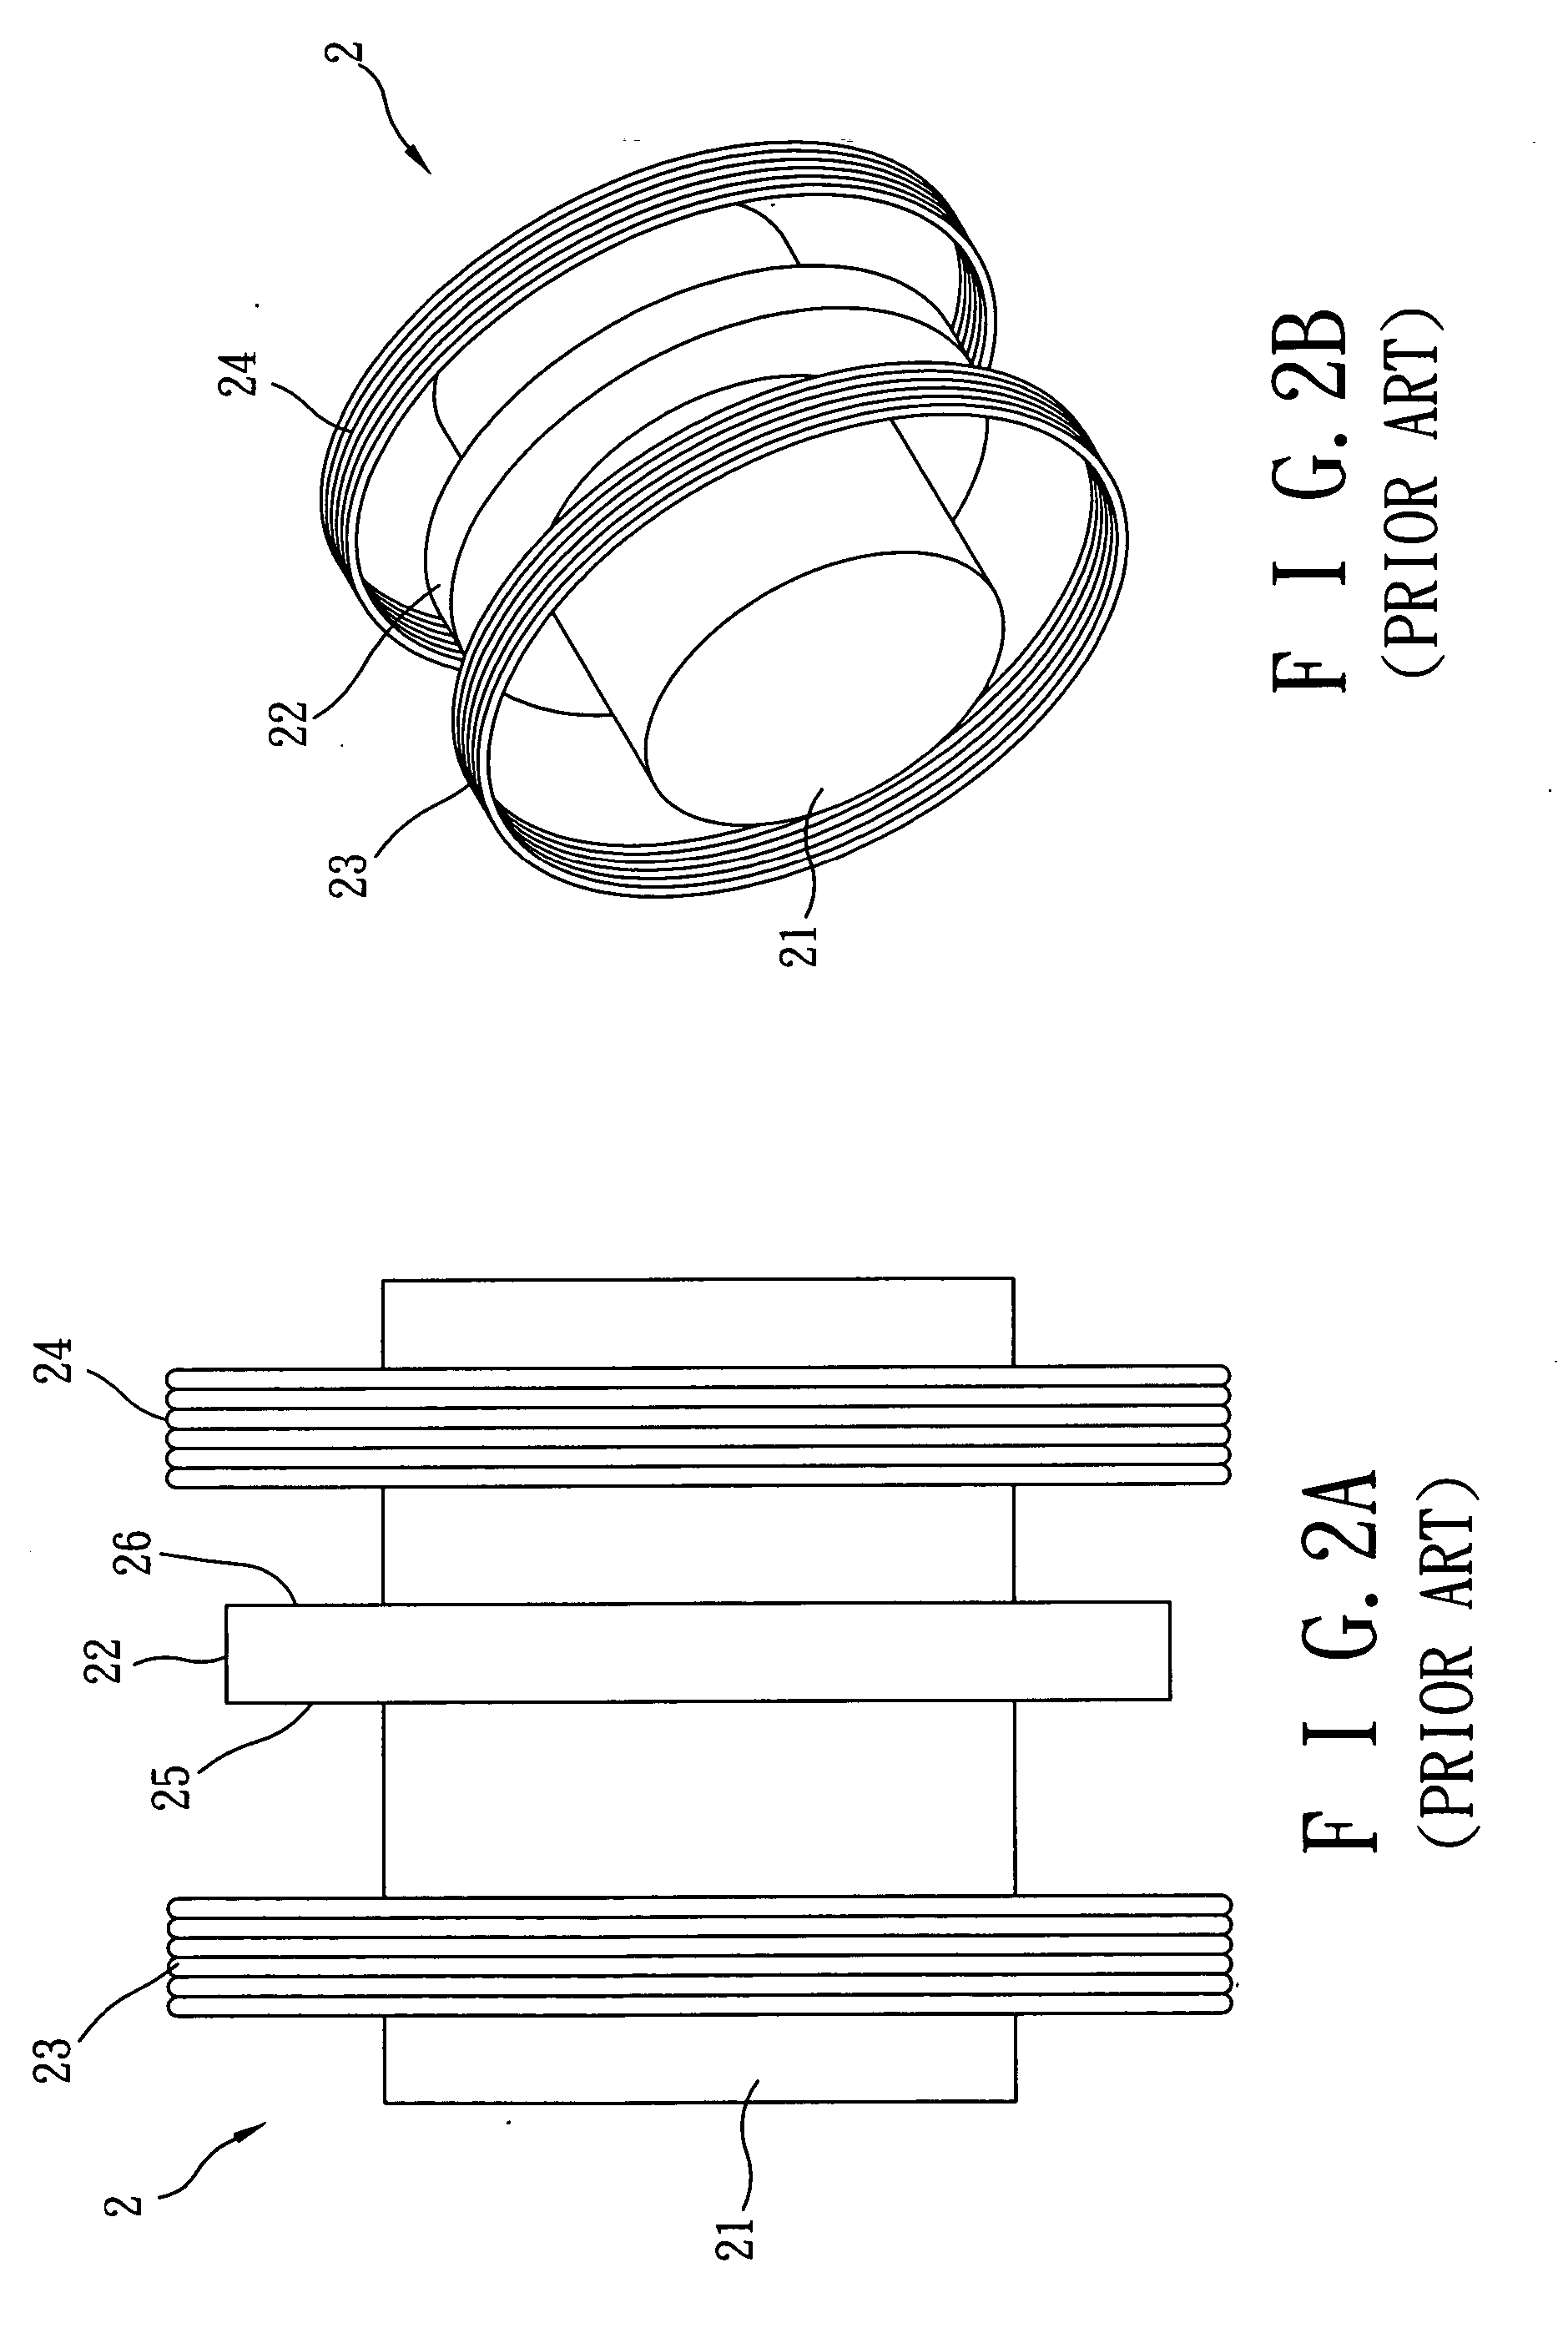 Electromagnetically actuated adjusting apparatus for lens